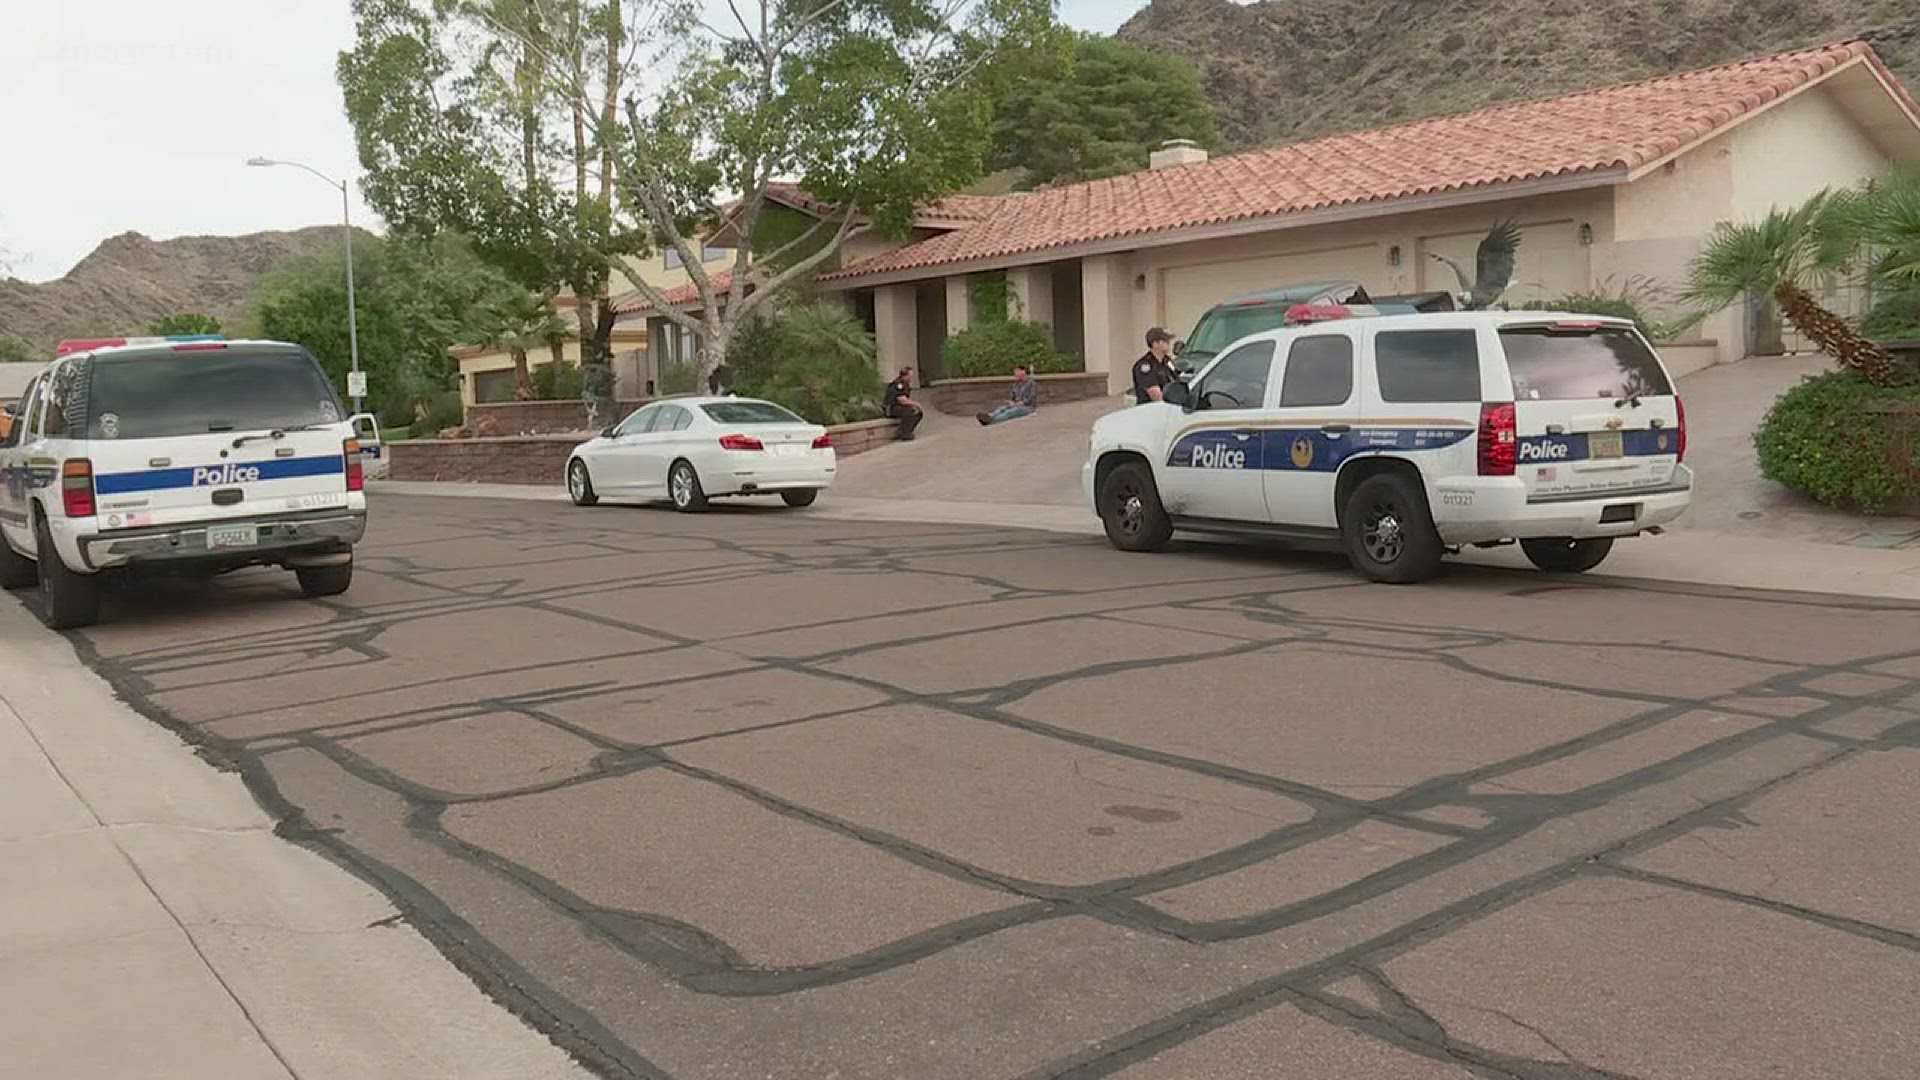 Phoenix police said a 77-year-old man and a 76-year-old woman were found dead with apparent gunshot wounds Monday morning in their Phoenix home.